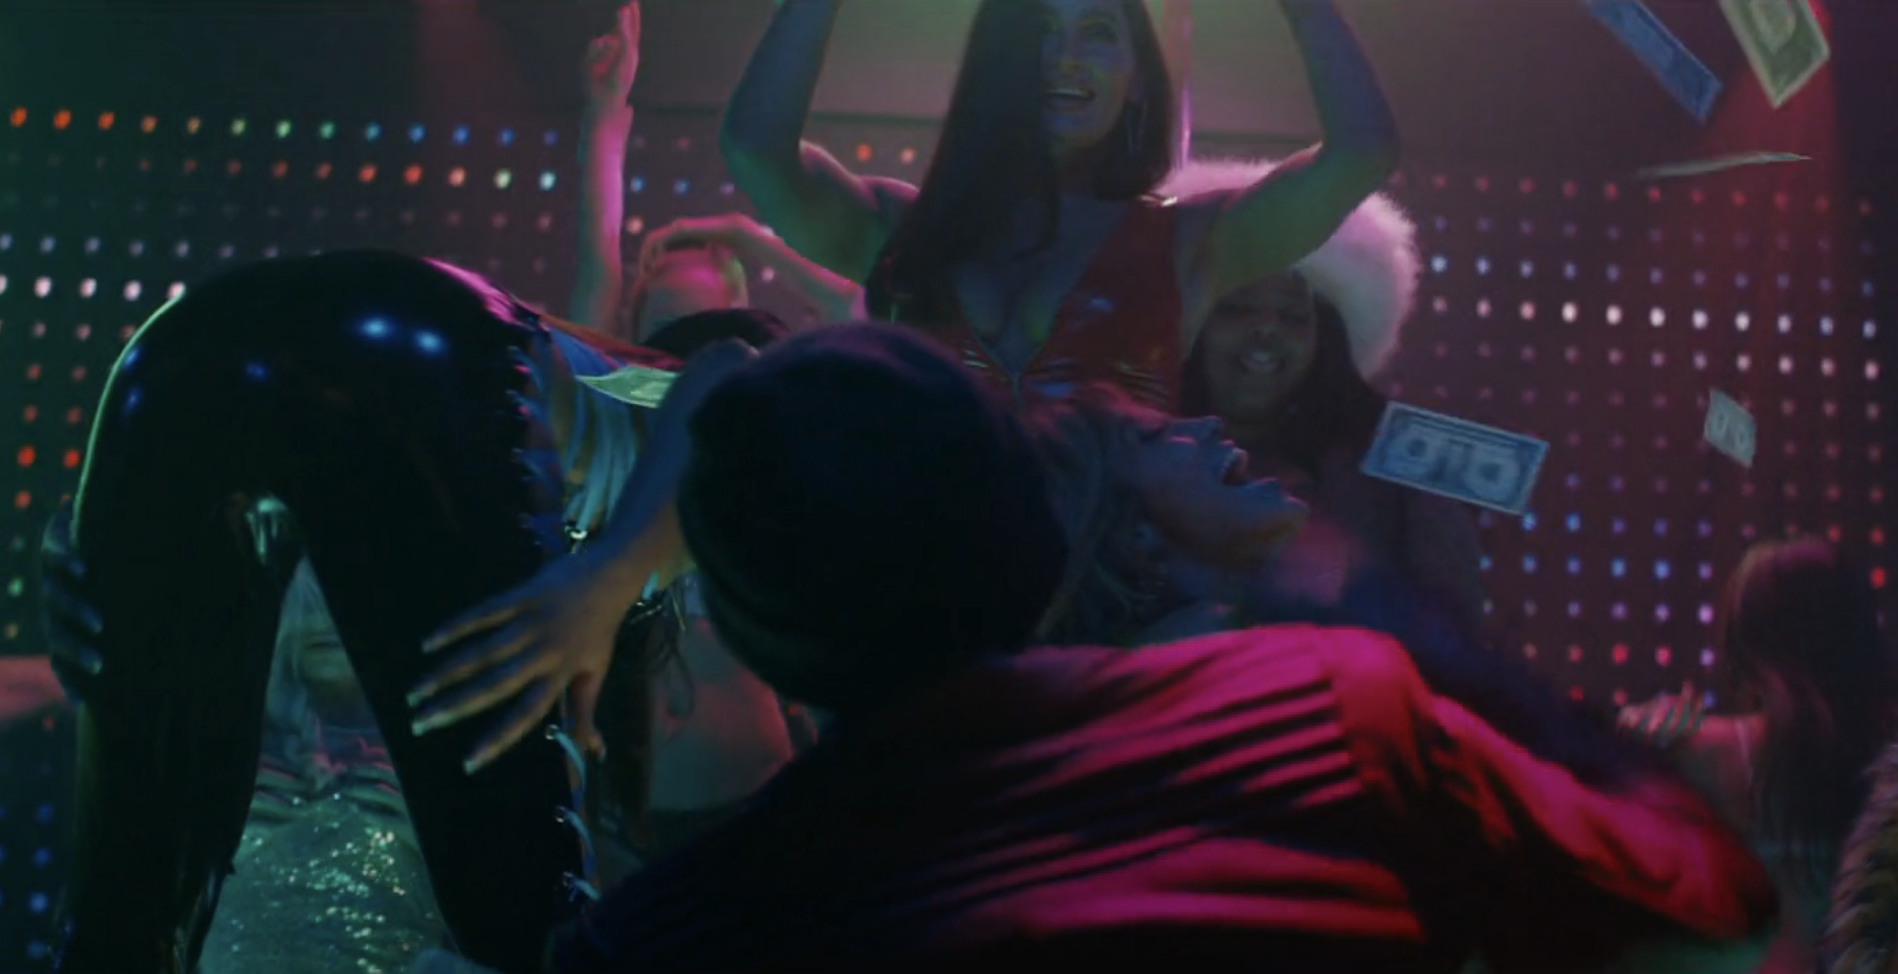 Usher throwing money on stage to performers in &quot;Hustlers&quot;